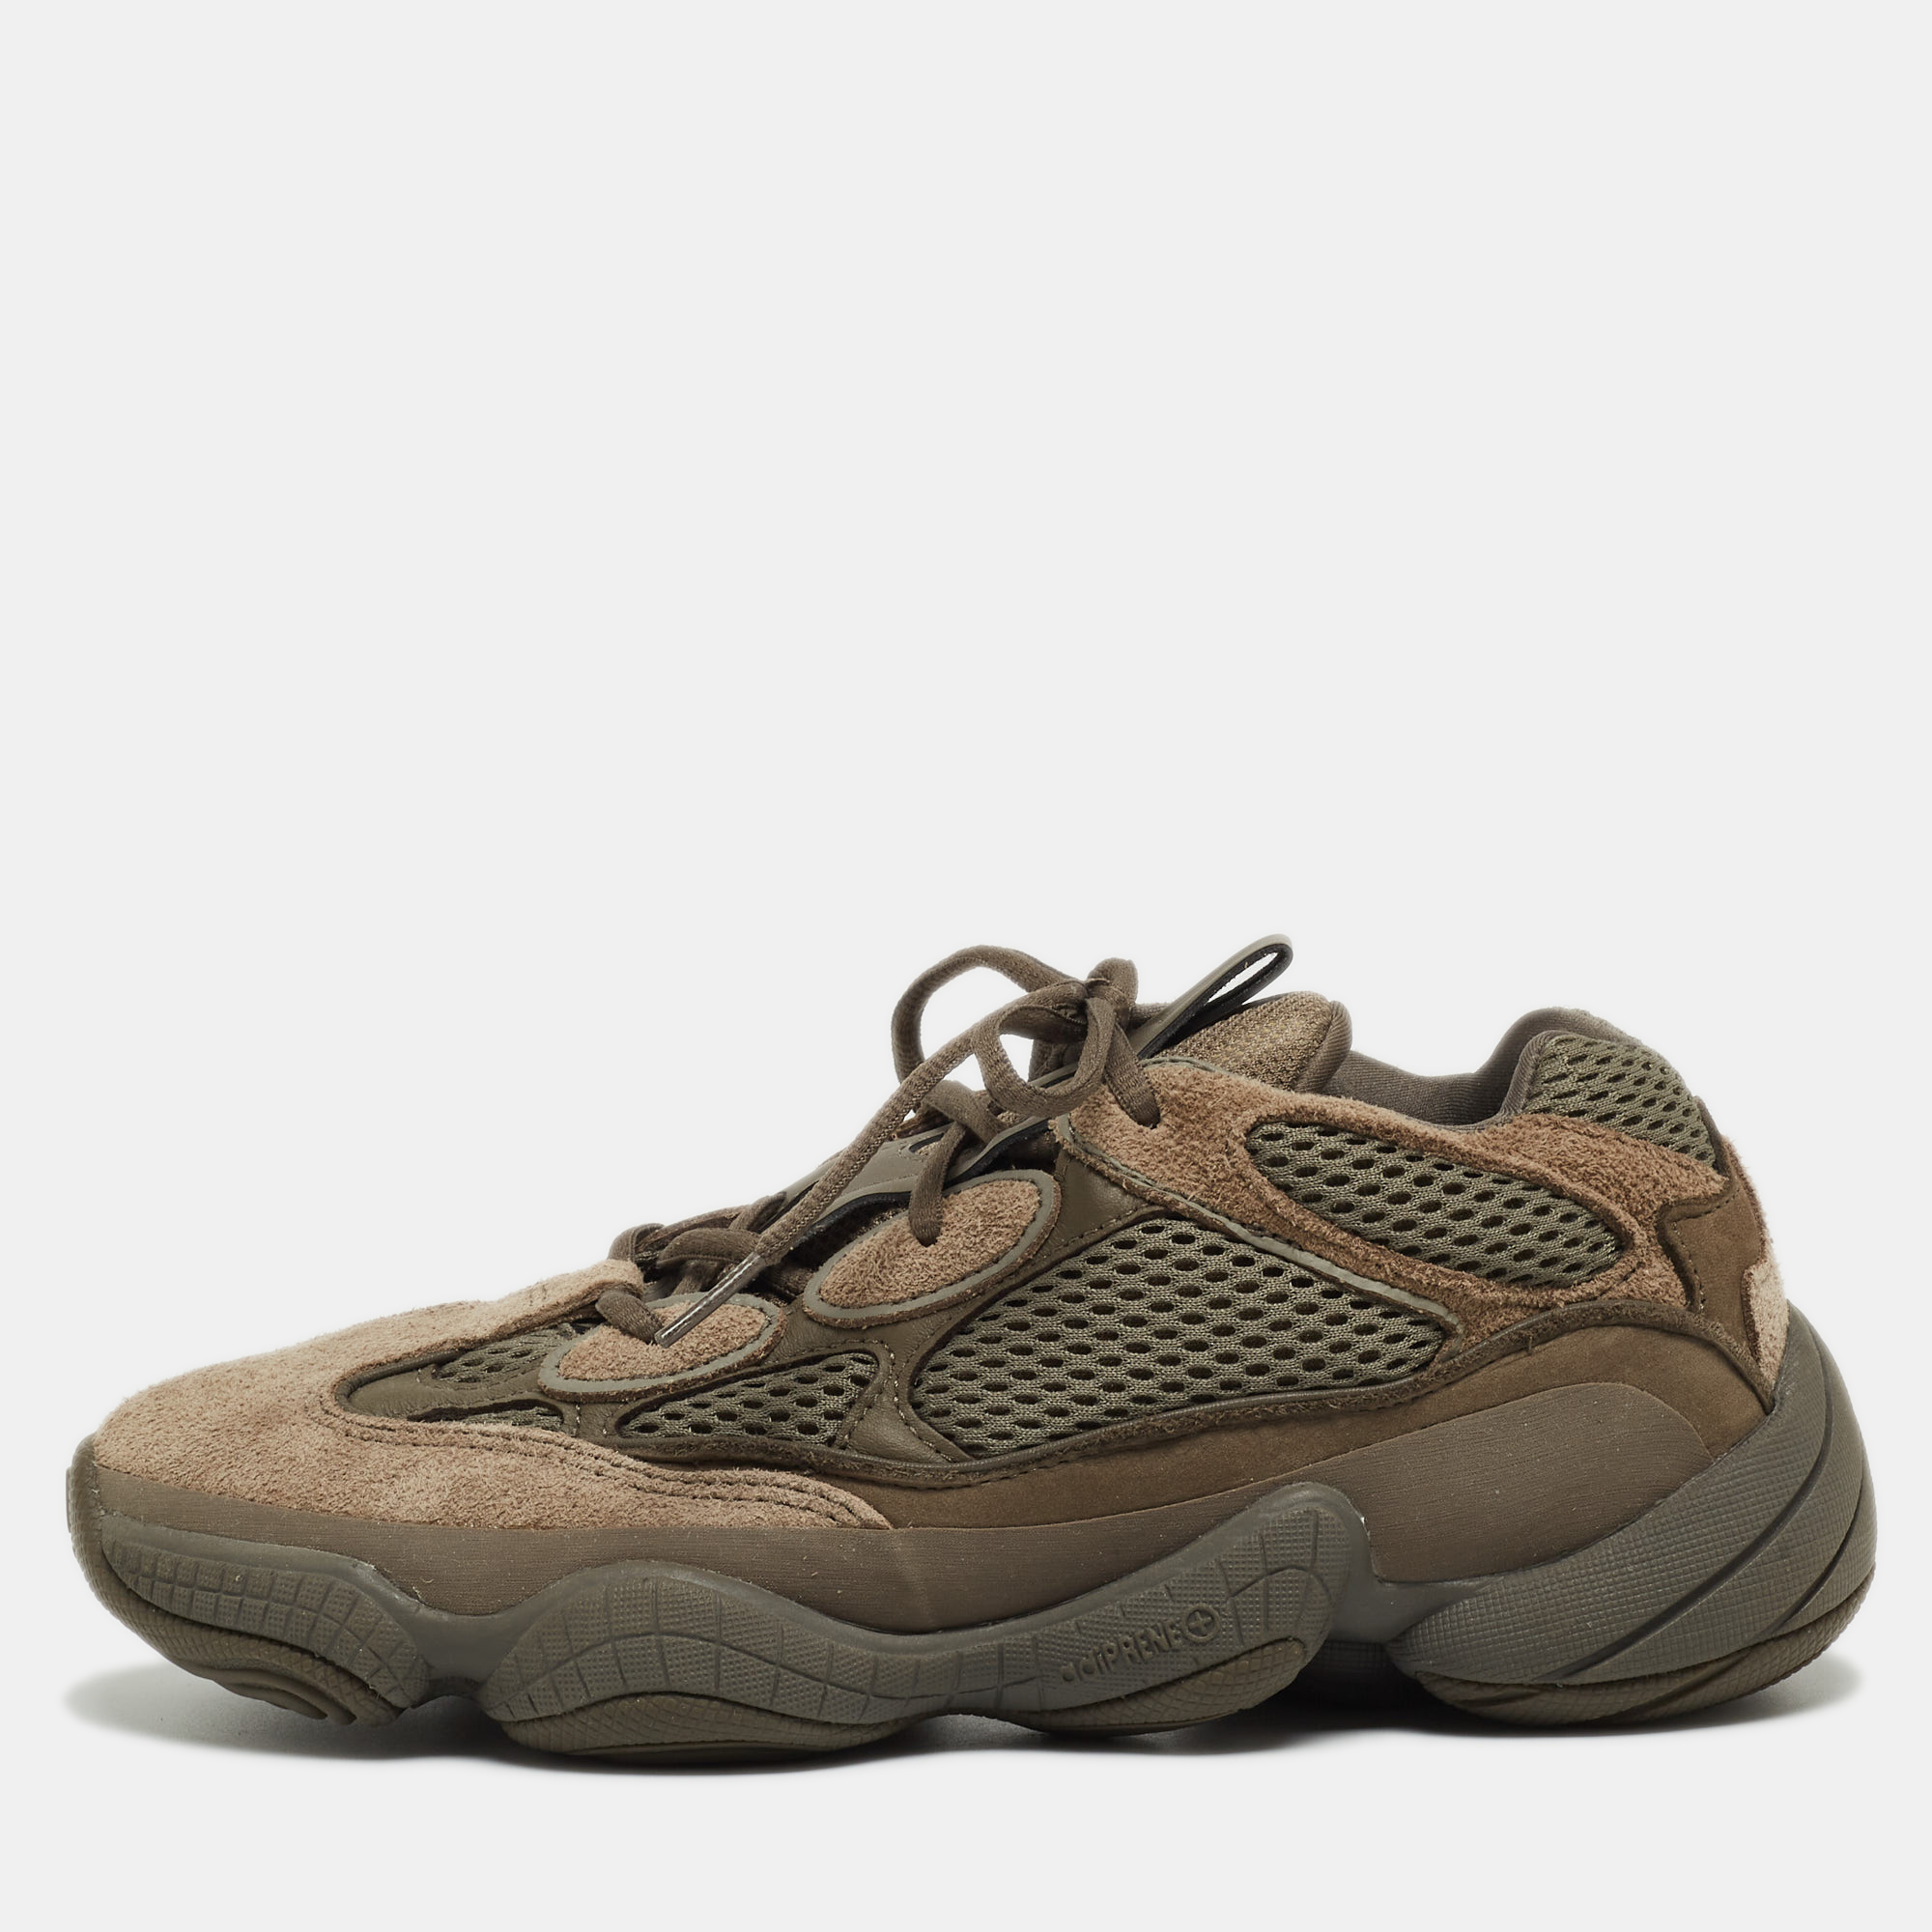 

Yeezy x Adidas Two Tone Mesh and Suede Yeezy 500 Clay Brown Sneakers Size  1/3